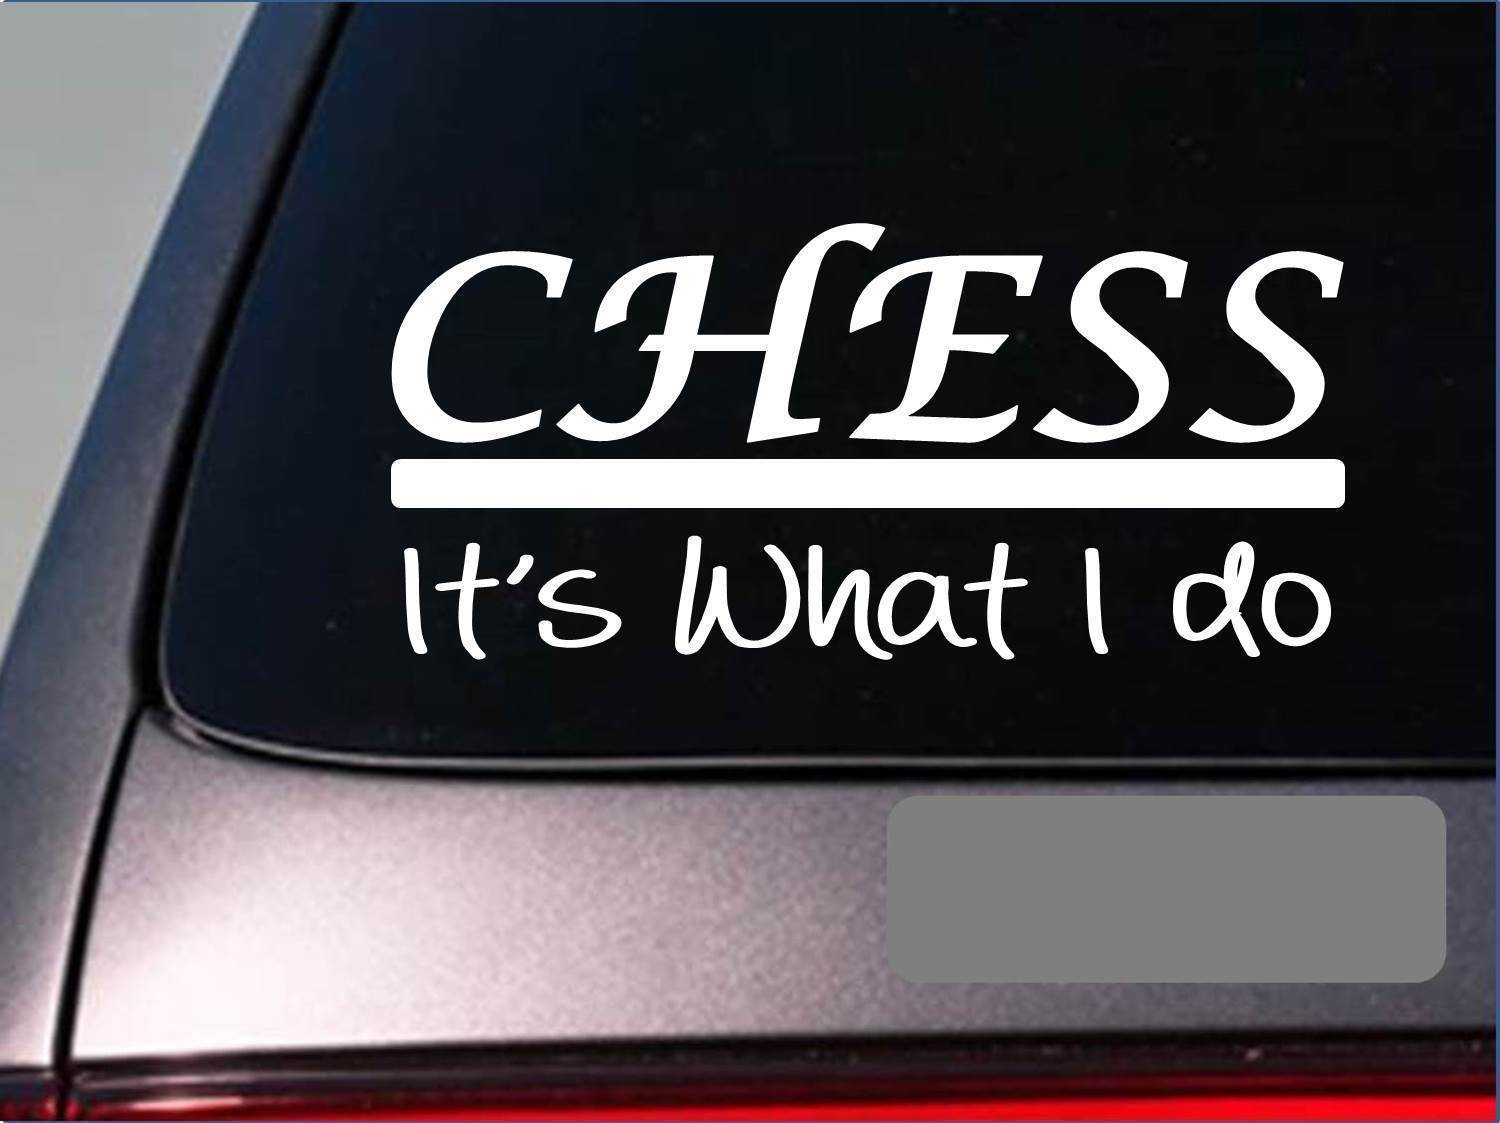 Chess sticker decal *E360* board queen king pawn pieces bishop knight rook set